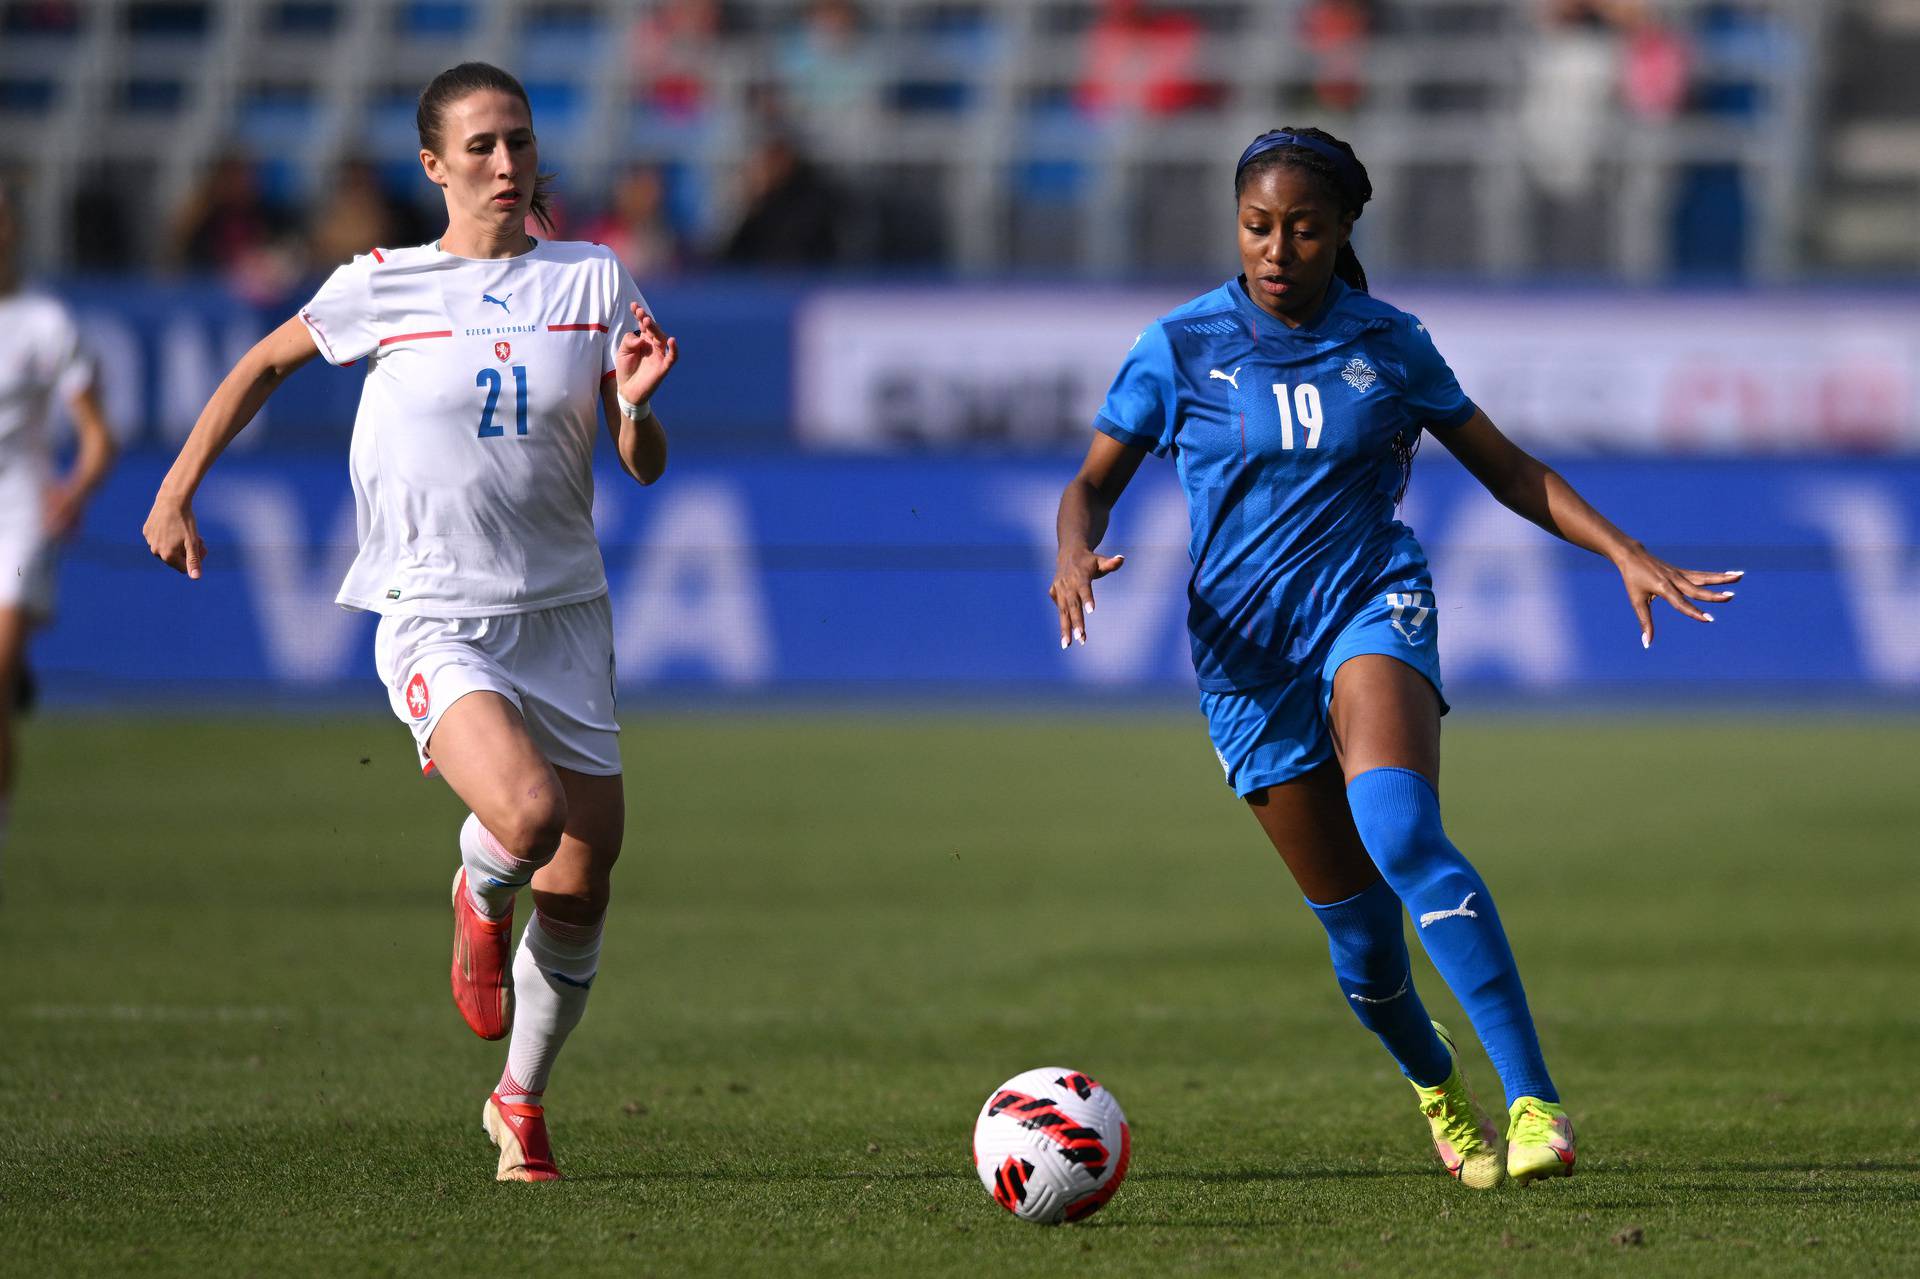 Soccer: 2022 SheBelieves Cup-Czech Republic at Iceland